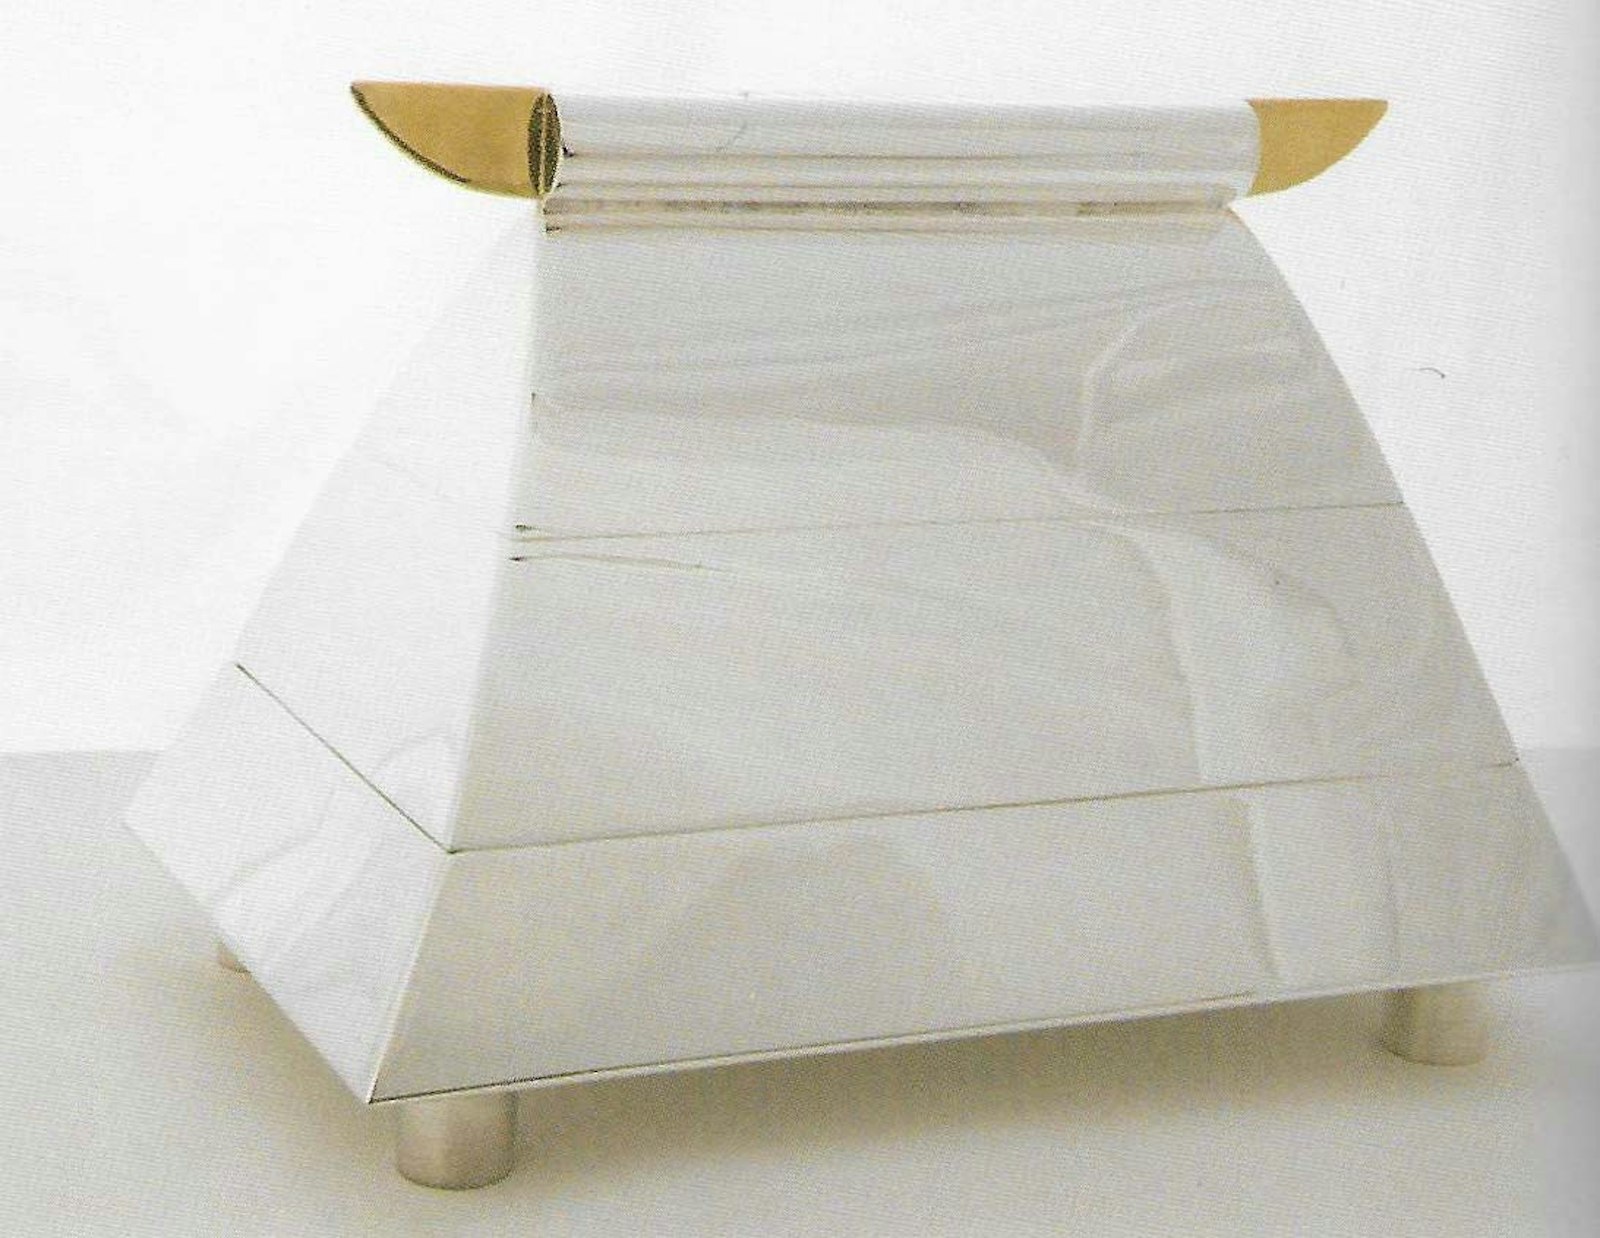 Pralinebox, 1993, silver and gold